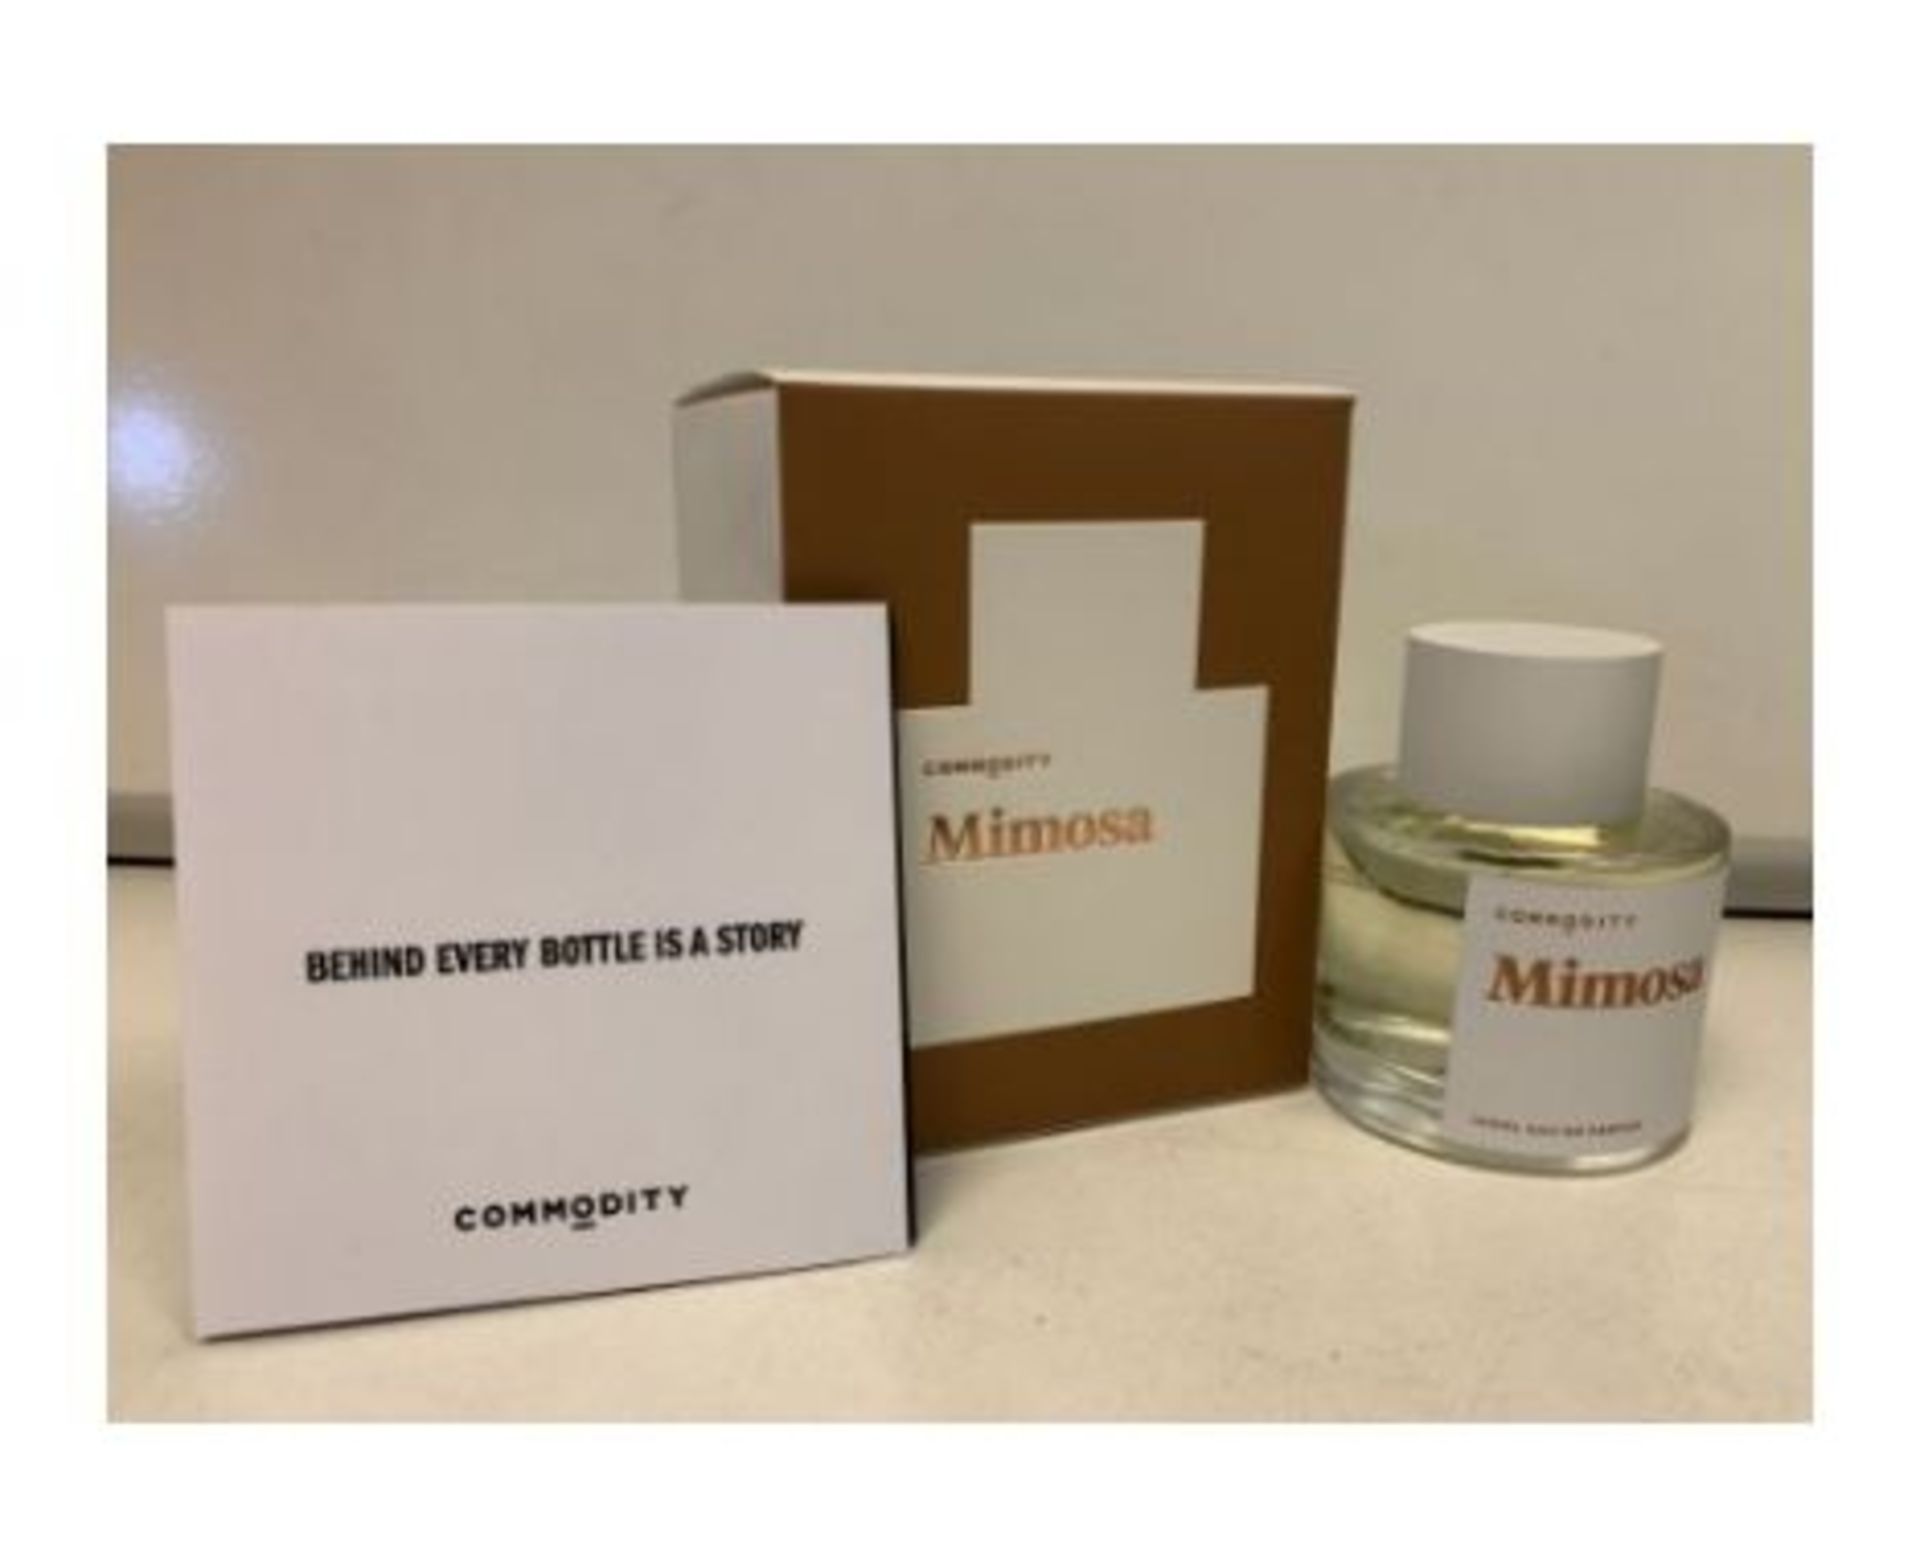 Commdity MIMOSA his/her fragrance 100ml bottle